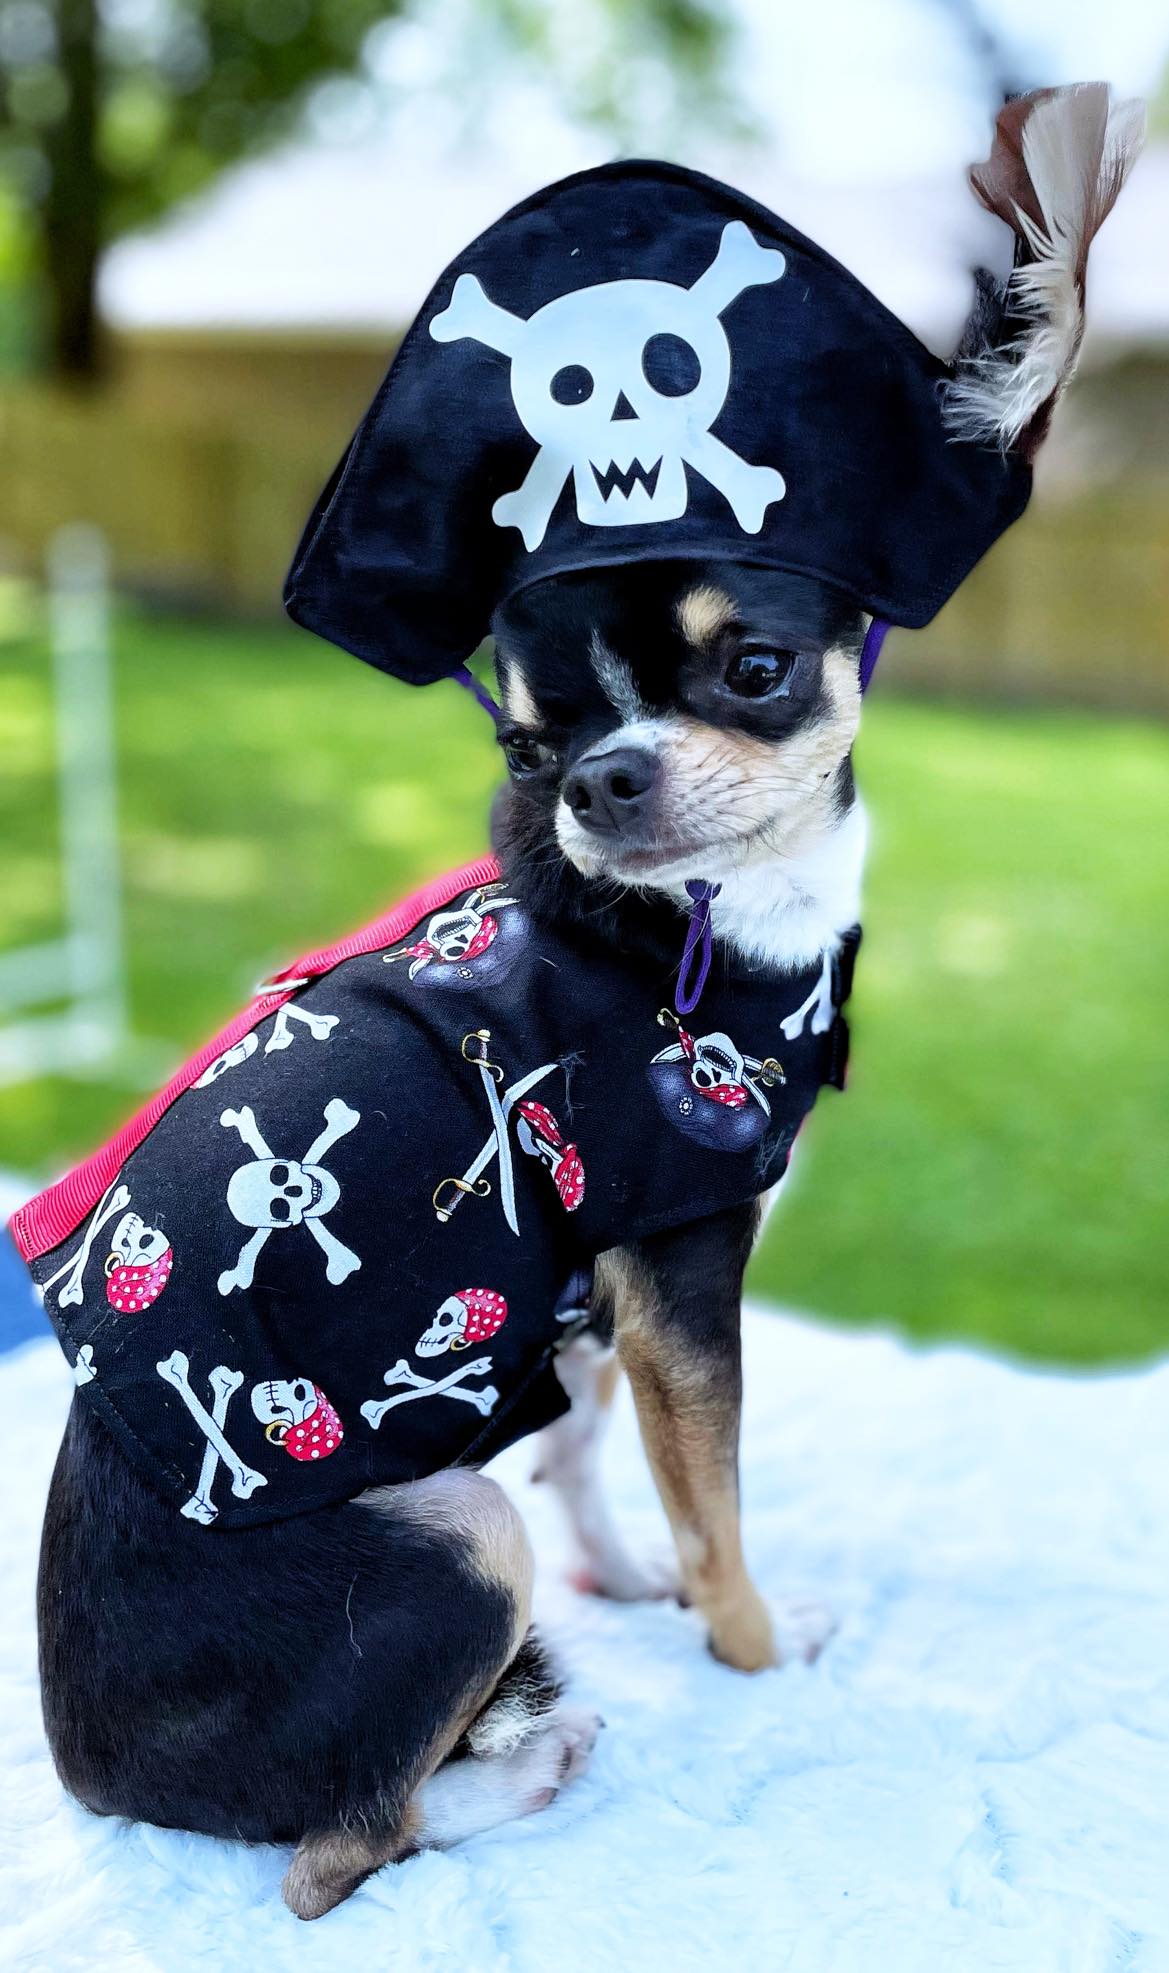 Teacup clothing, dog dress, puppy dress, teacup outfit, teacup harness, tiny dog clothes, cat clothing, cat dress, Guinea pig clothing, Puppy harness, Dog harness, Pirate costume for dogs